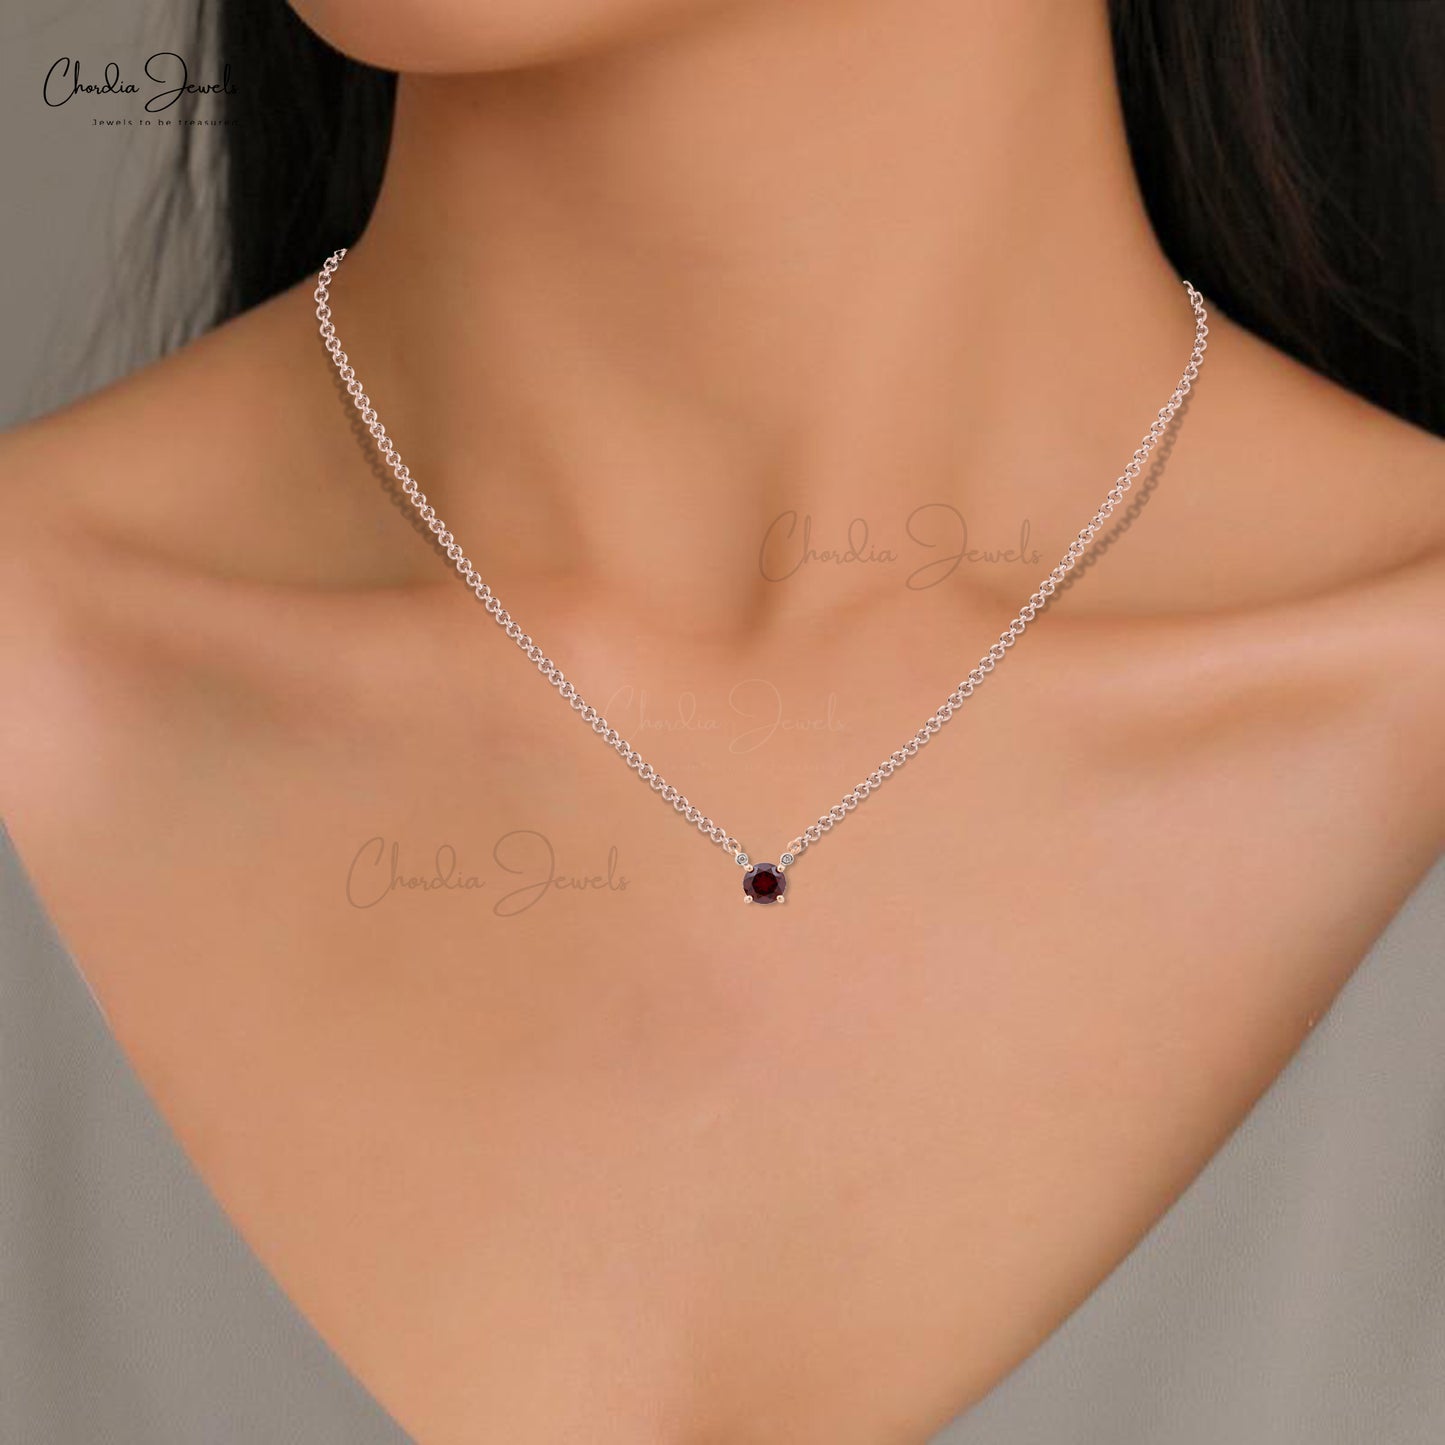 Round Brilliant Cut Garnet Solitaire Necklace Pendant Natural Diamond Accented Necklace in 14k Real Rose Gold Valentine Day Gift